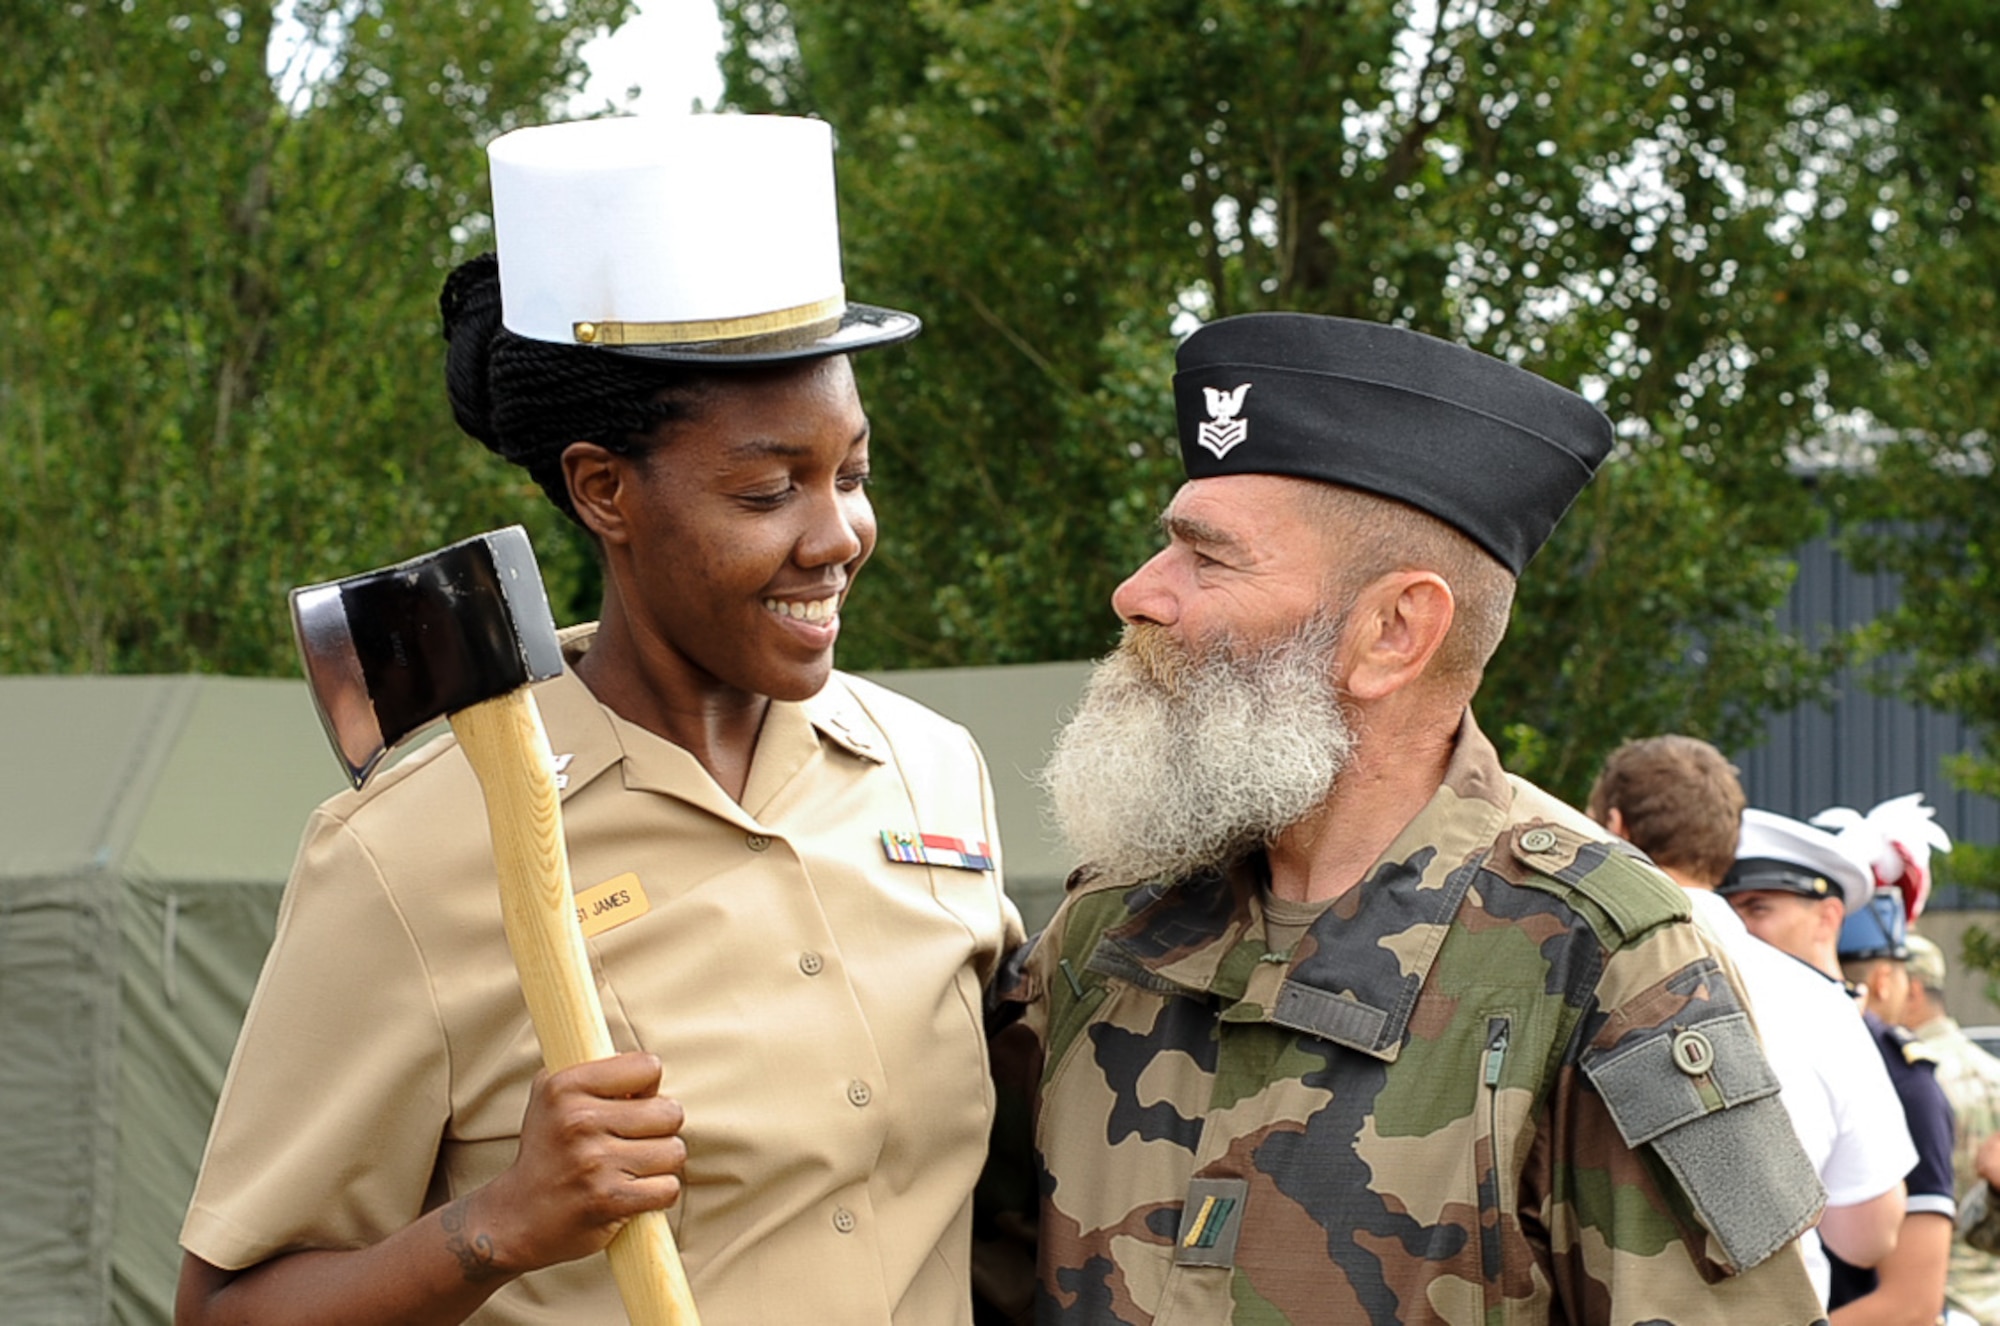 A U.S. Navy Seaman and a member of the Armée de Terre switch hats for a photo at Camp de Satory, France, July 12, 2017. During rehearsals, military members from countries had the opportunity to interact and learn from the other’s military traditions and culture, further strengthening the bond between old allies. (U.S. Air Force photo by Airman 1st Class Savannah L. Waters)